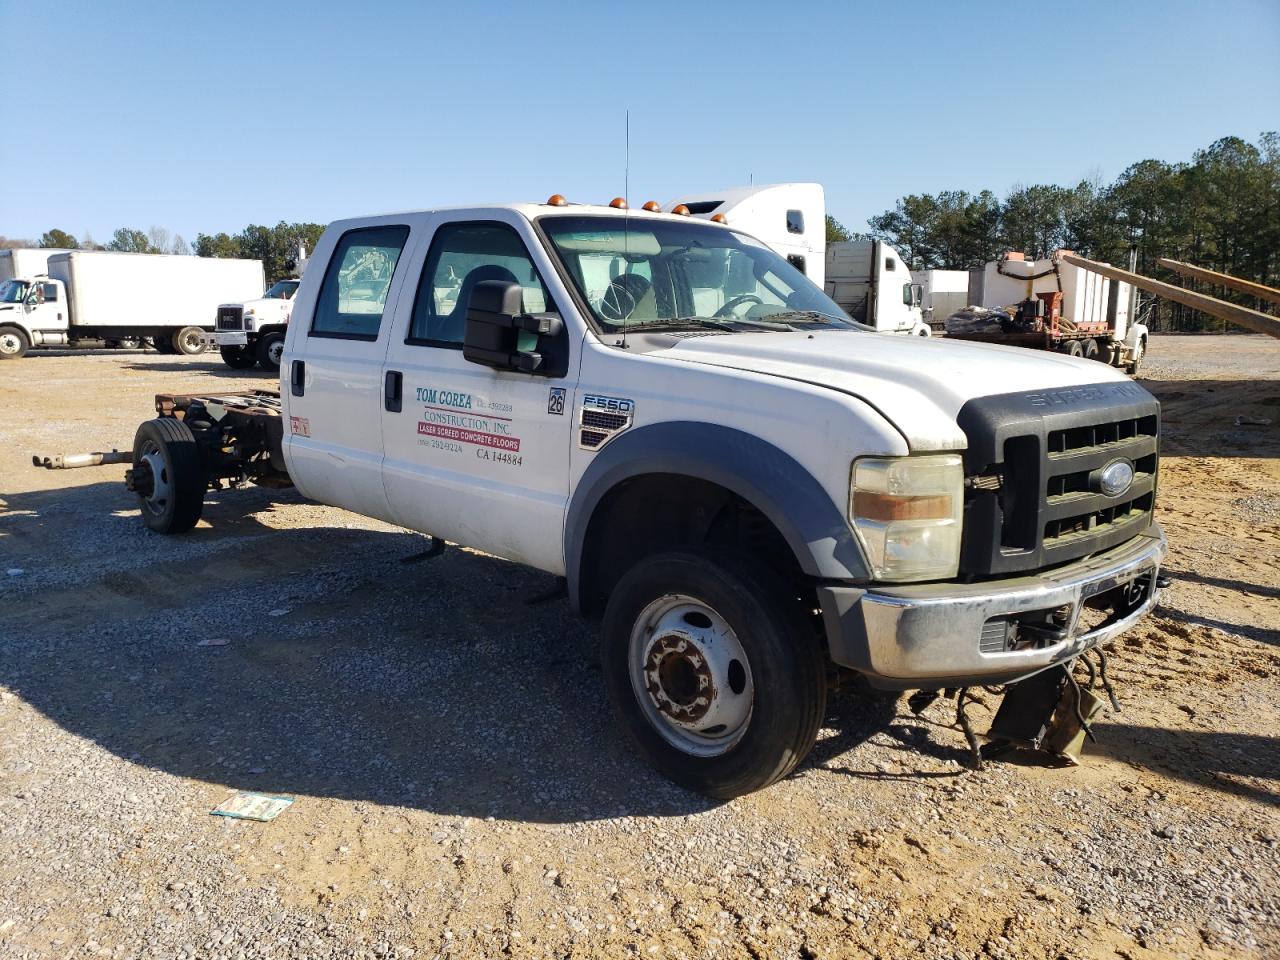 1FDAW56R48E****** Salvage and Wrecked 2008 Ford F-550 in Alabama State